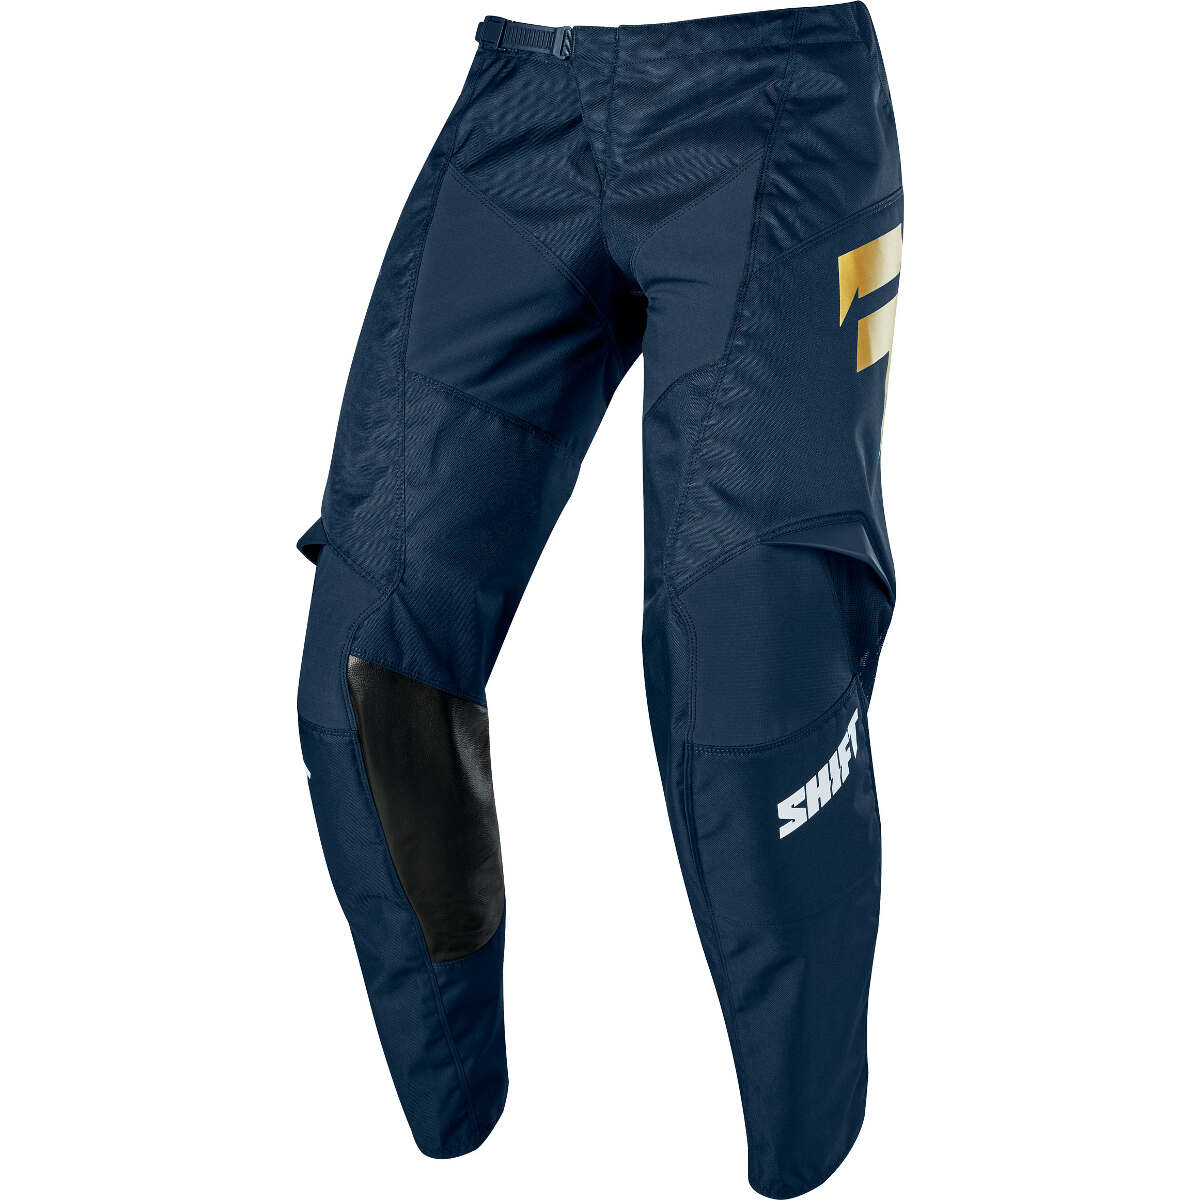 Shift MX Pants Whit3 Label Navy/Gold - Limited Edition